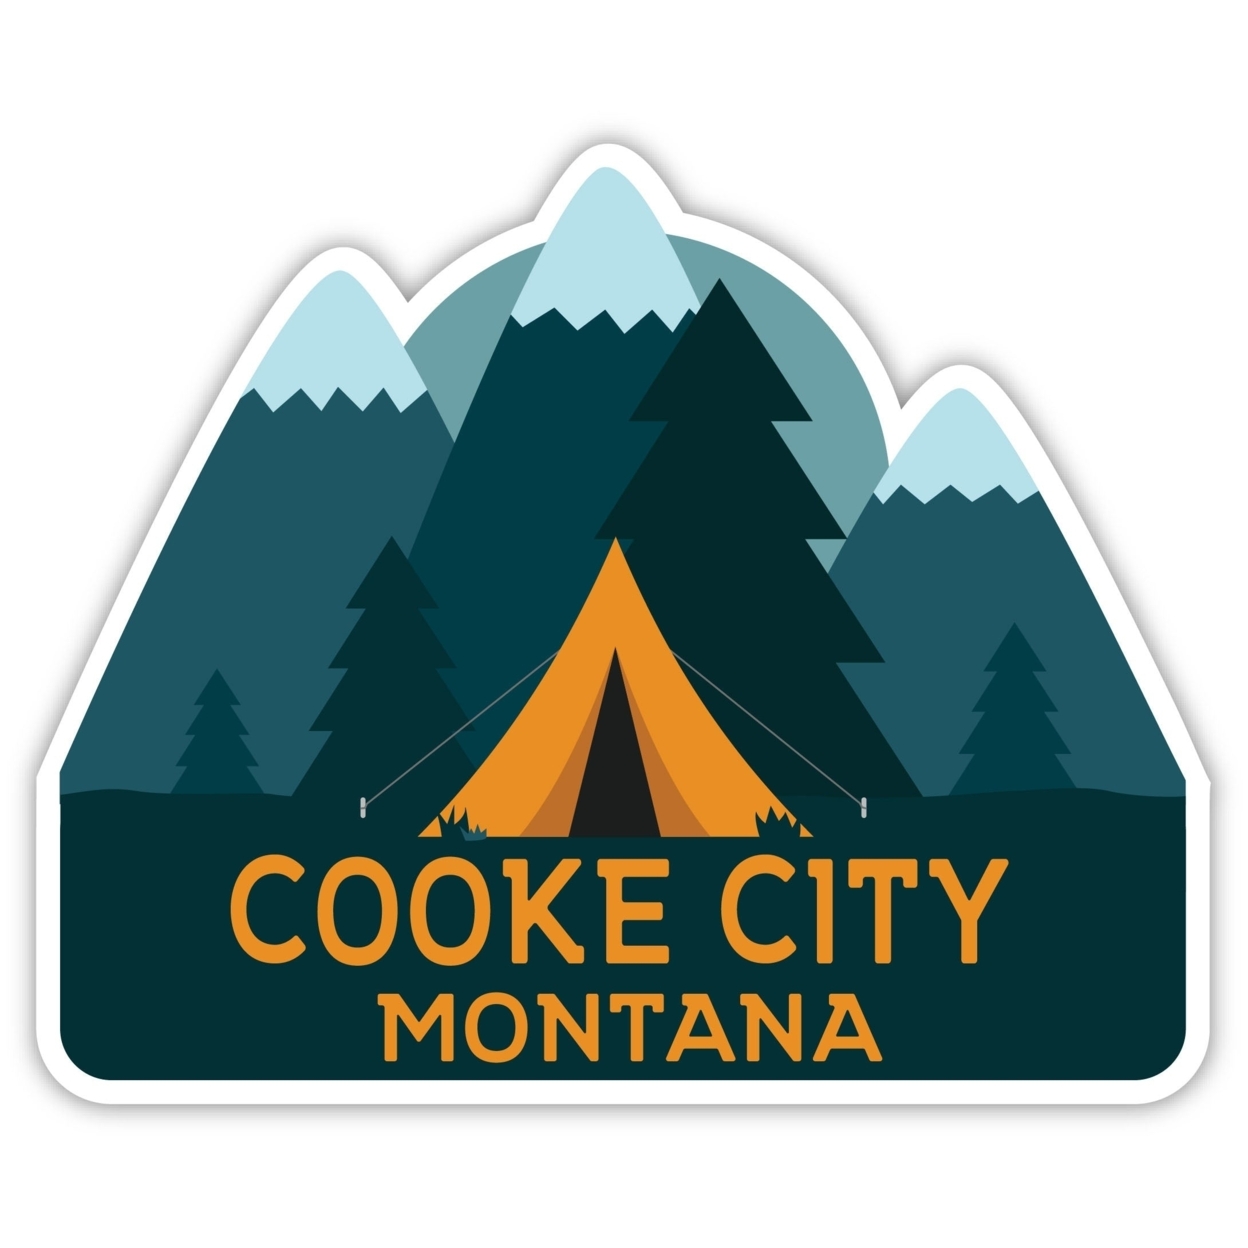 Cooke City Montana Souvenir Decorative Stickers (Choose Theme And Size) - 4-Pack, 2-Inch, Tent